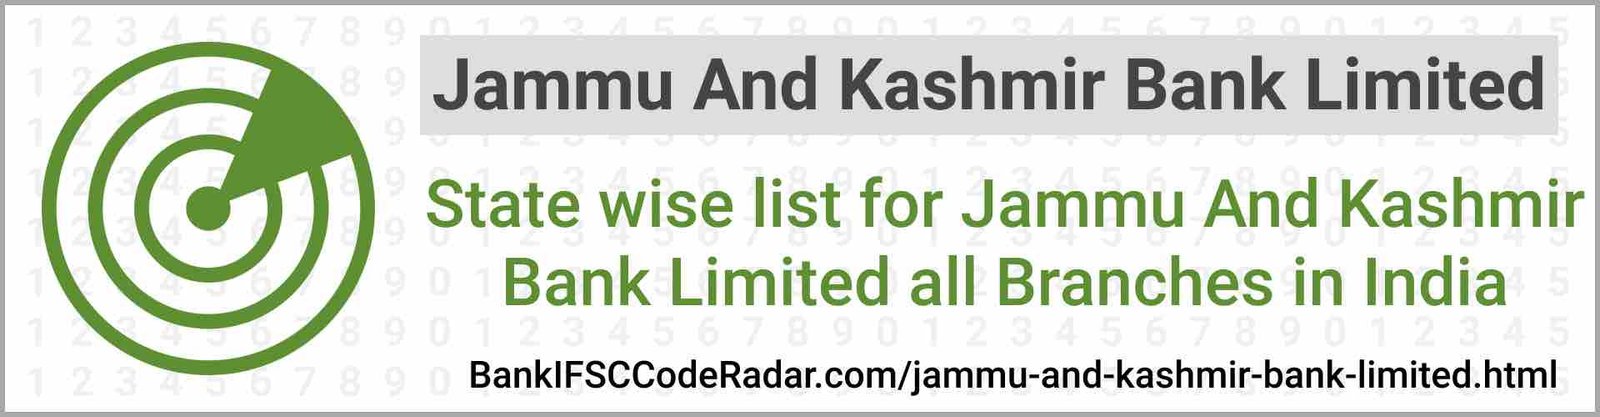 Jammu And Kashmir Bank Limited All Branches India